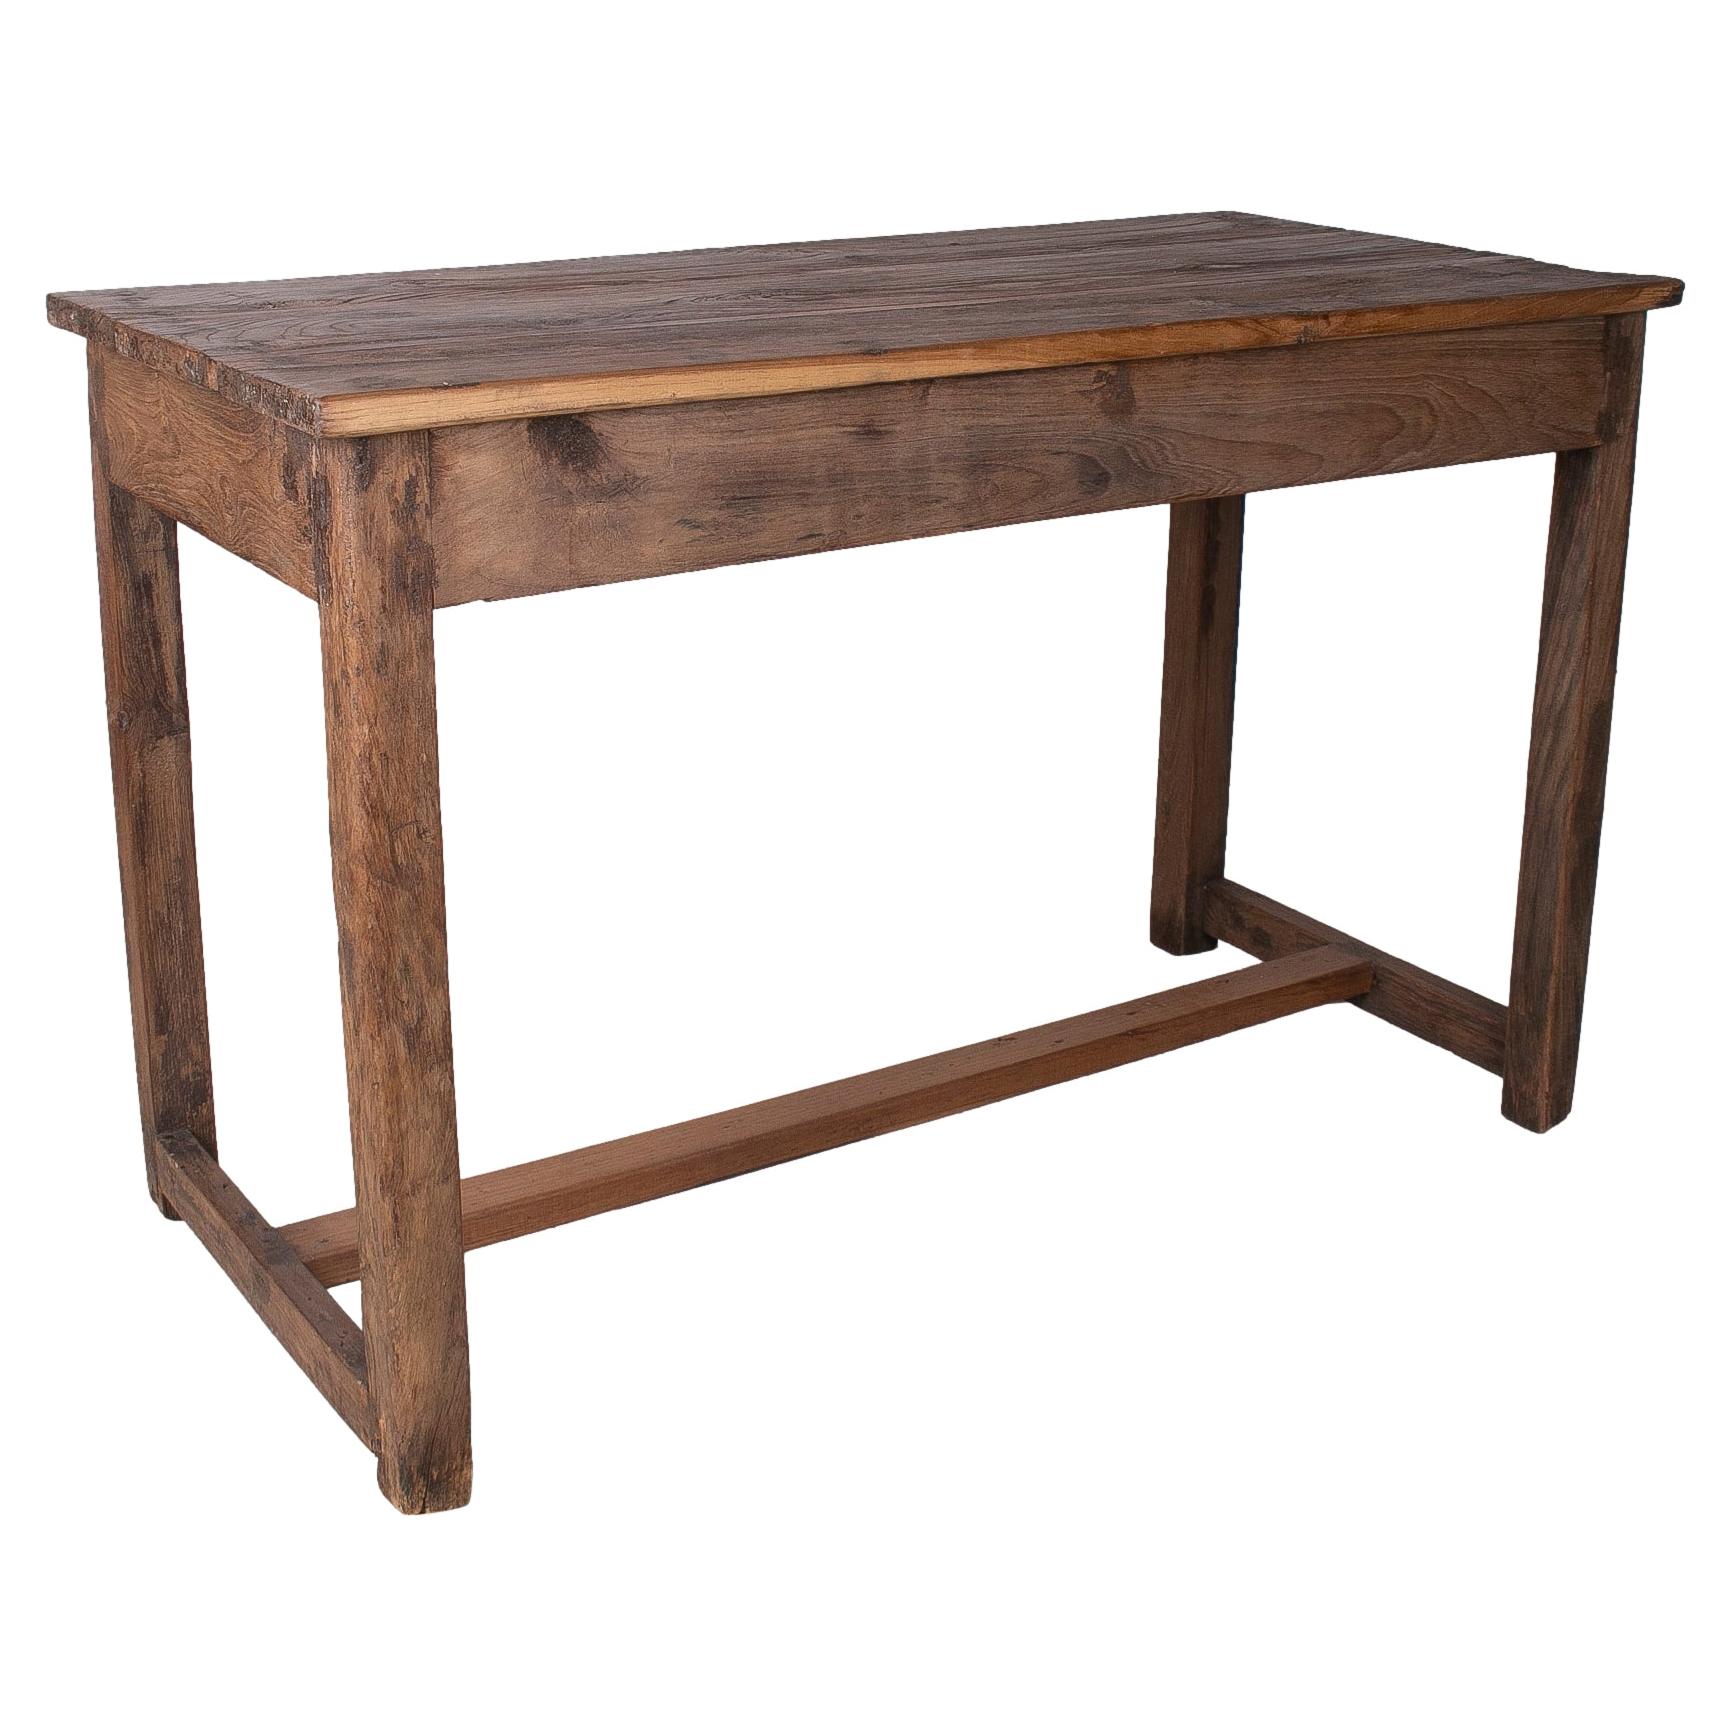 1970s Spanish Industrial Washed Wood Table w/ Crossbeam Legs For Sale